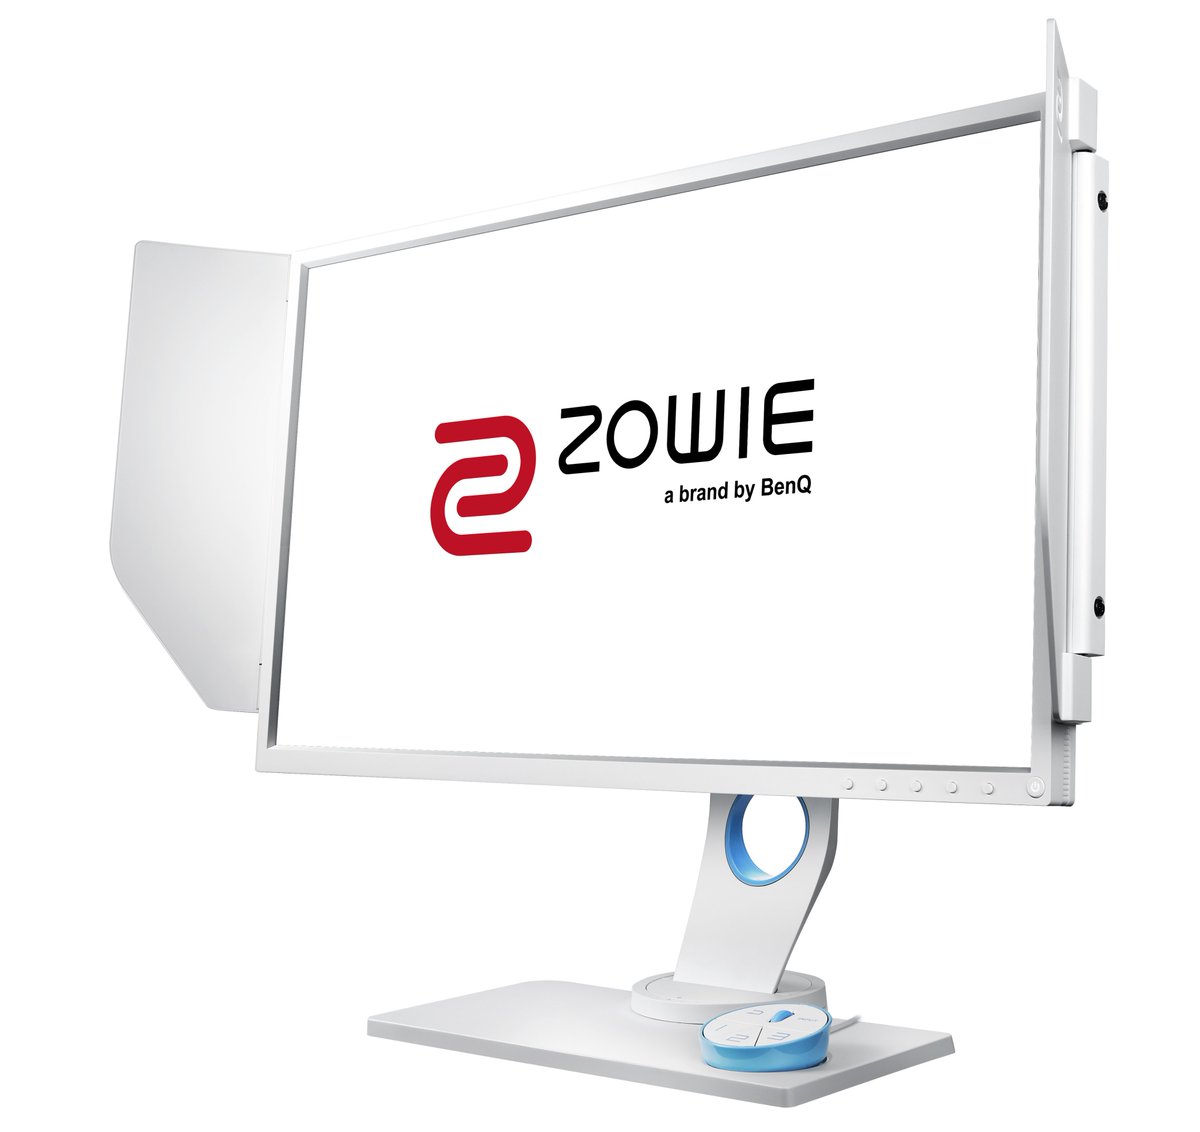 Zowie Europe Zowie Xl2546 Divina With Dyac And 240hz Are Ready For Pre Order On Our German Partner Alternate De Pre Order Now T Co Nqvjulyyld T Co jinlltzh Twitter